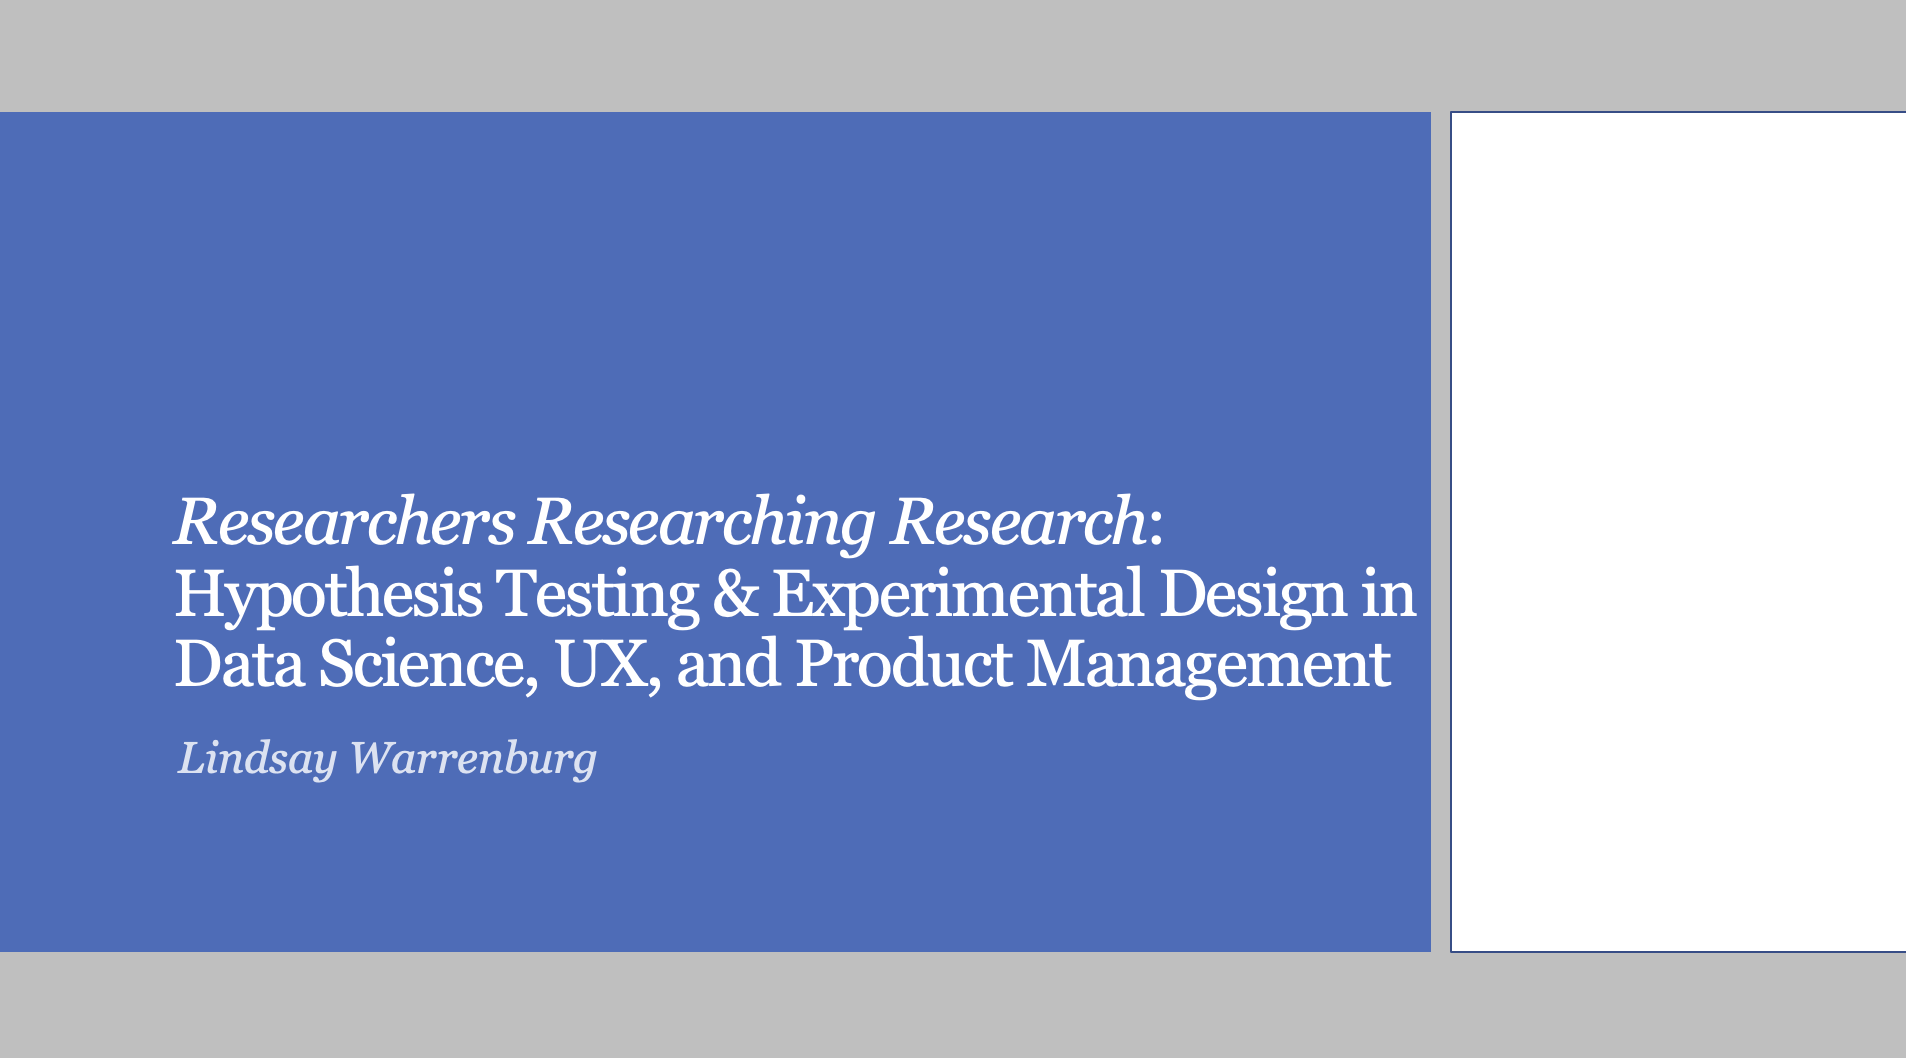 Hypothesis Testing and Experimental Design in Data Science, UX, and Product Management